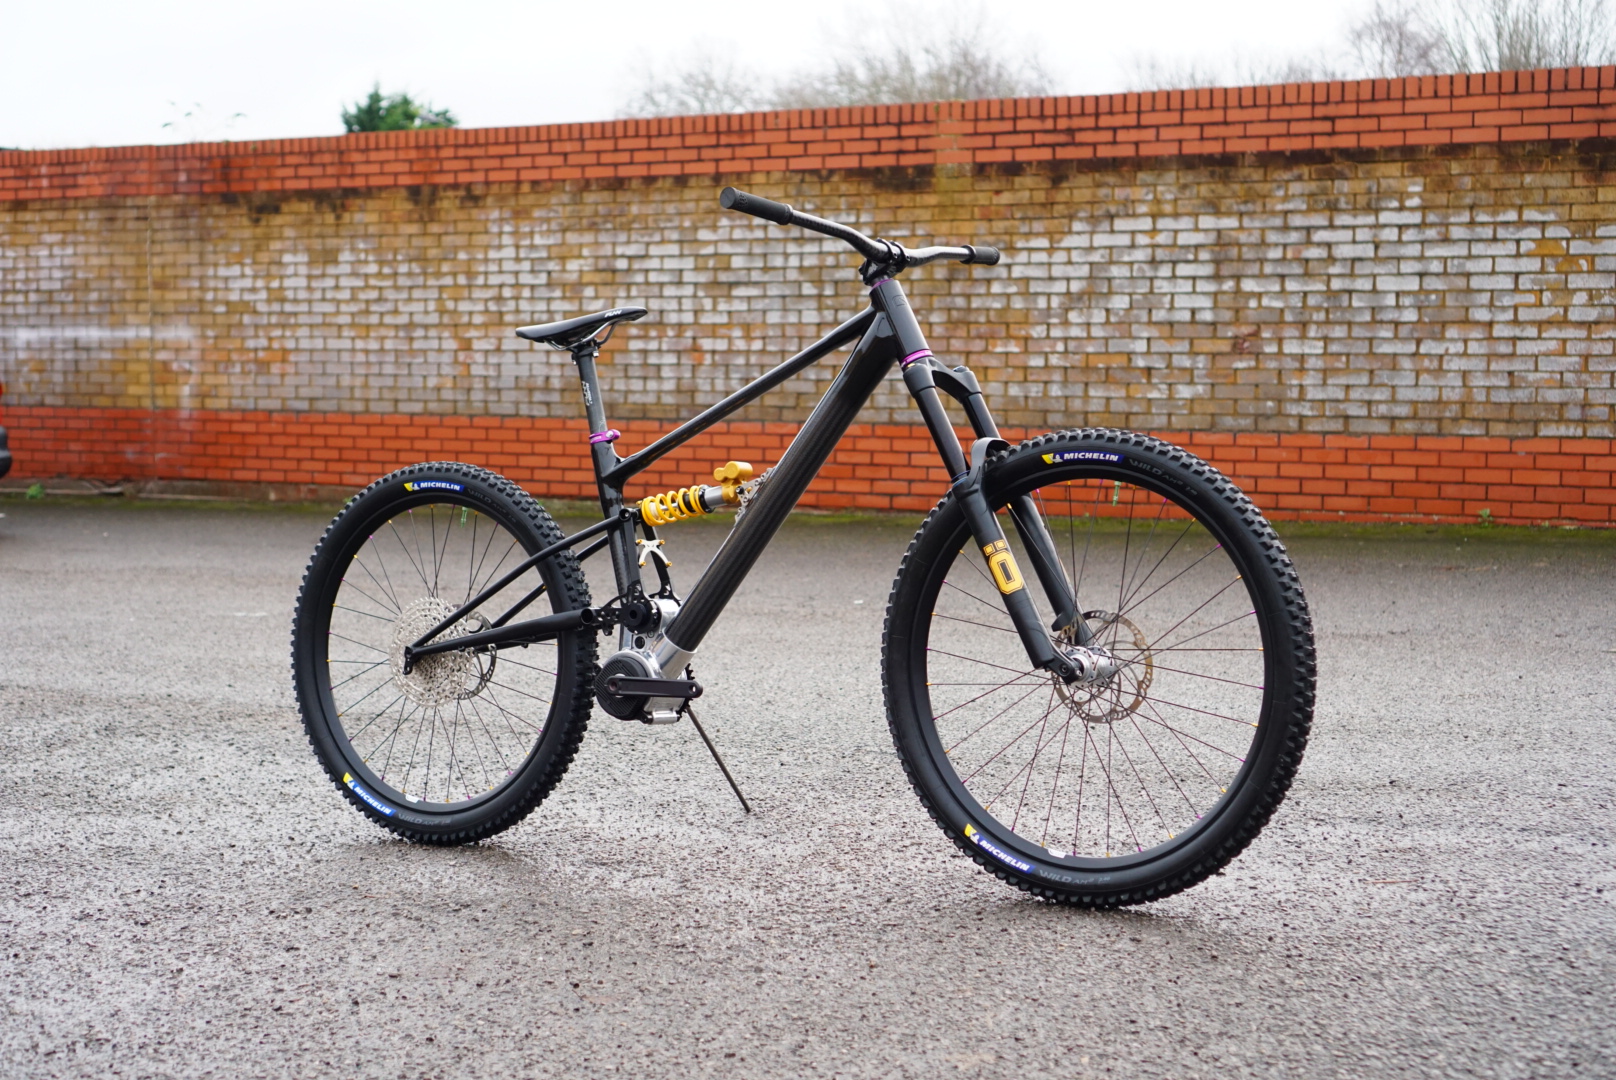 Starling cycles’ first carbon fibre frame